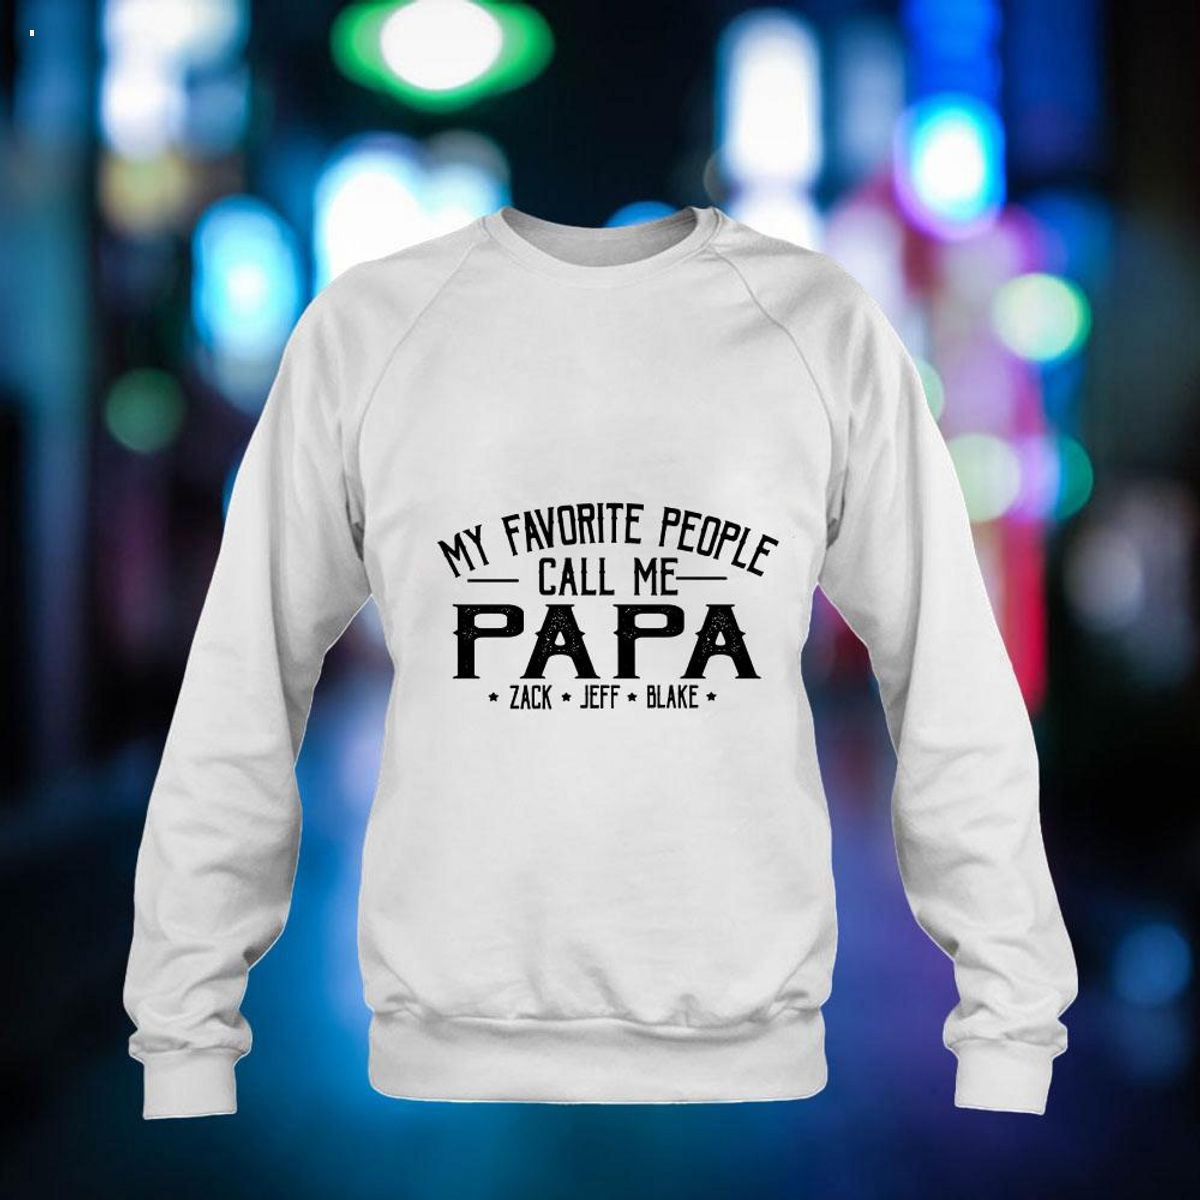 Lovelypod - Personalized My Favorite People Call Me Papa Shirt